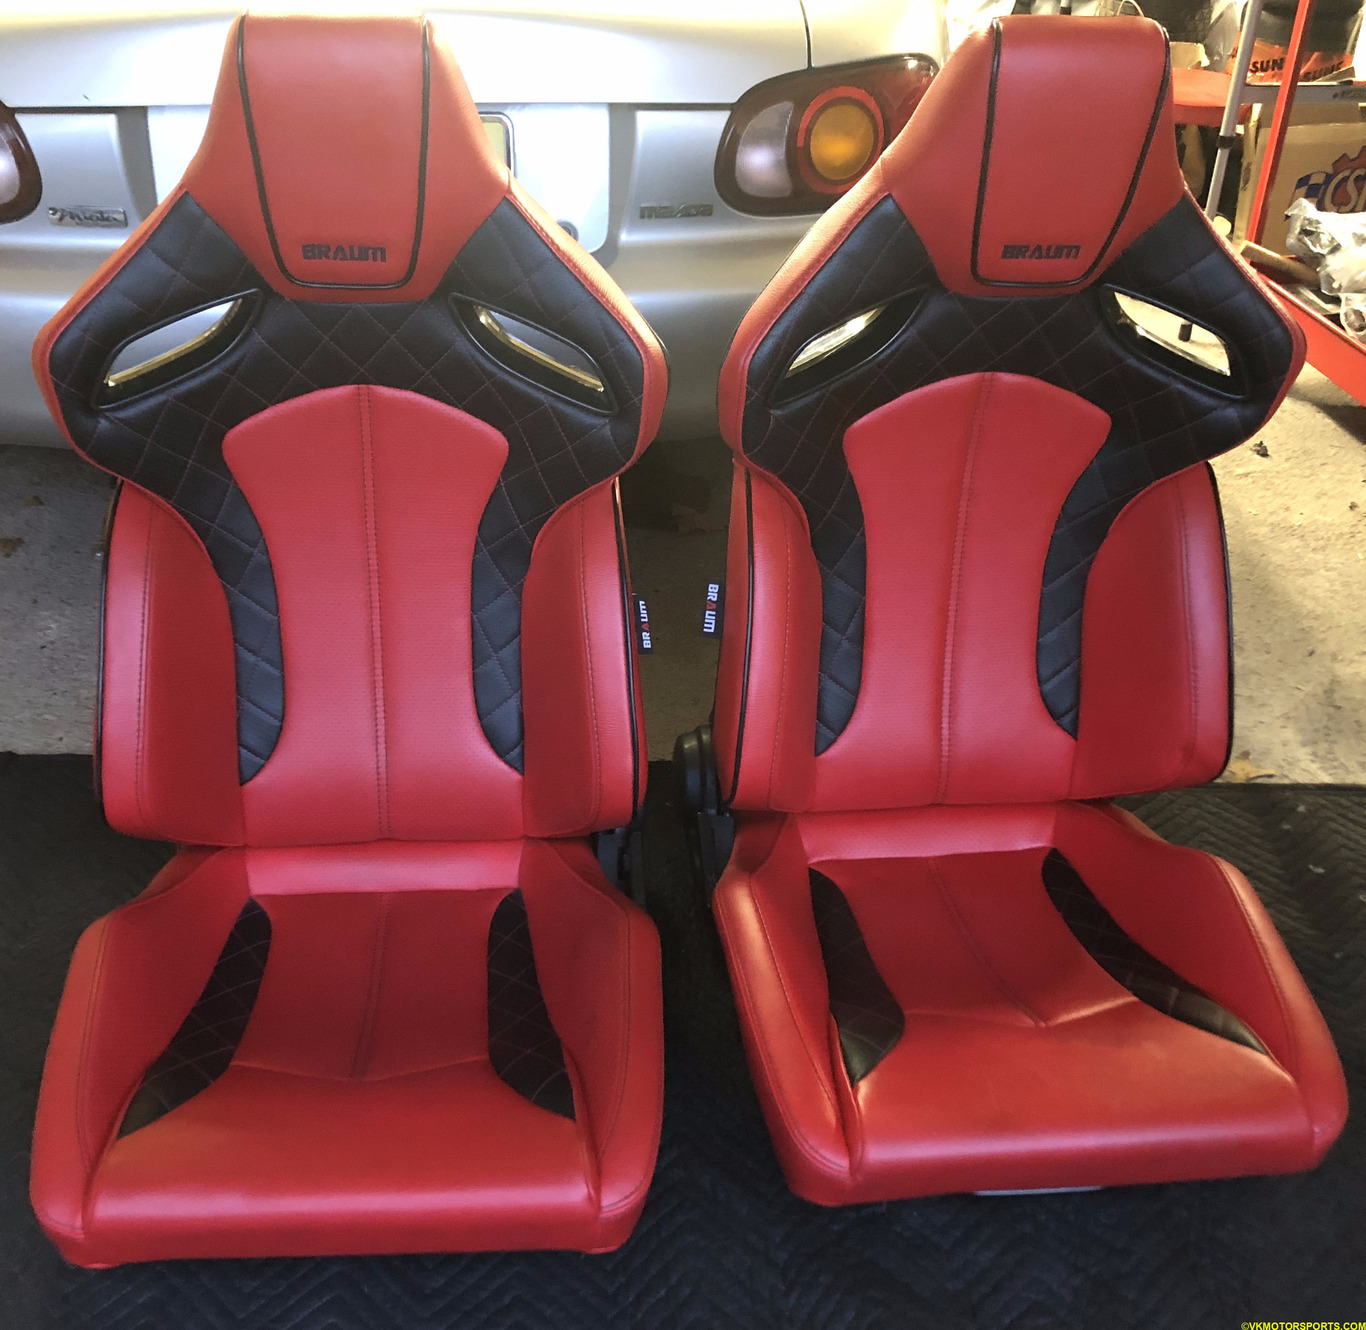 Figure 6a. A pair of Braum Racing seats I want to install